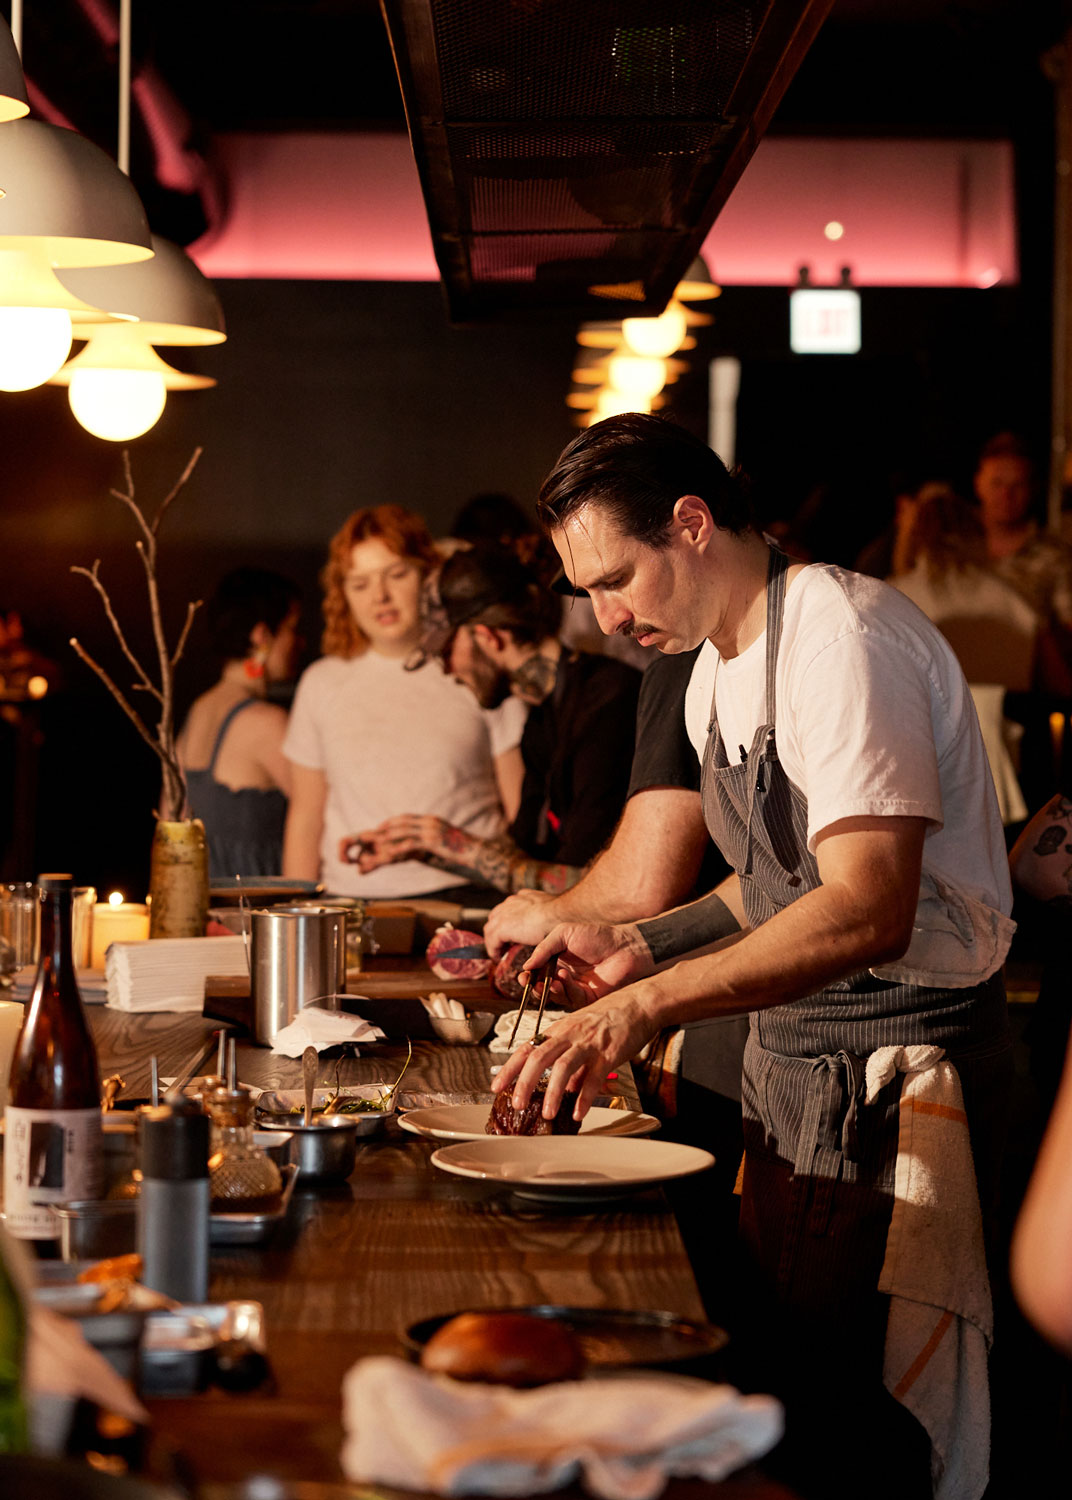 Cochef and partner Trevor Fleming preparing food at Warlord, with Julia Suhr in the background.